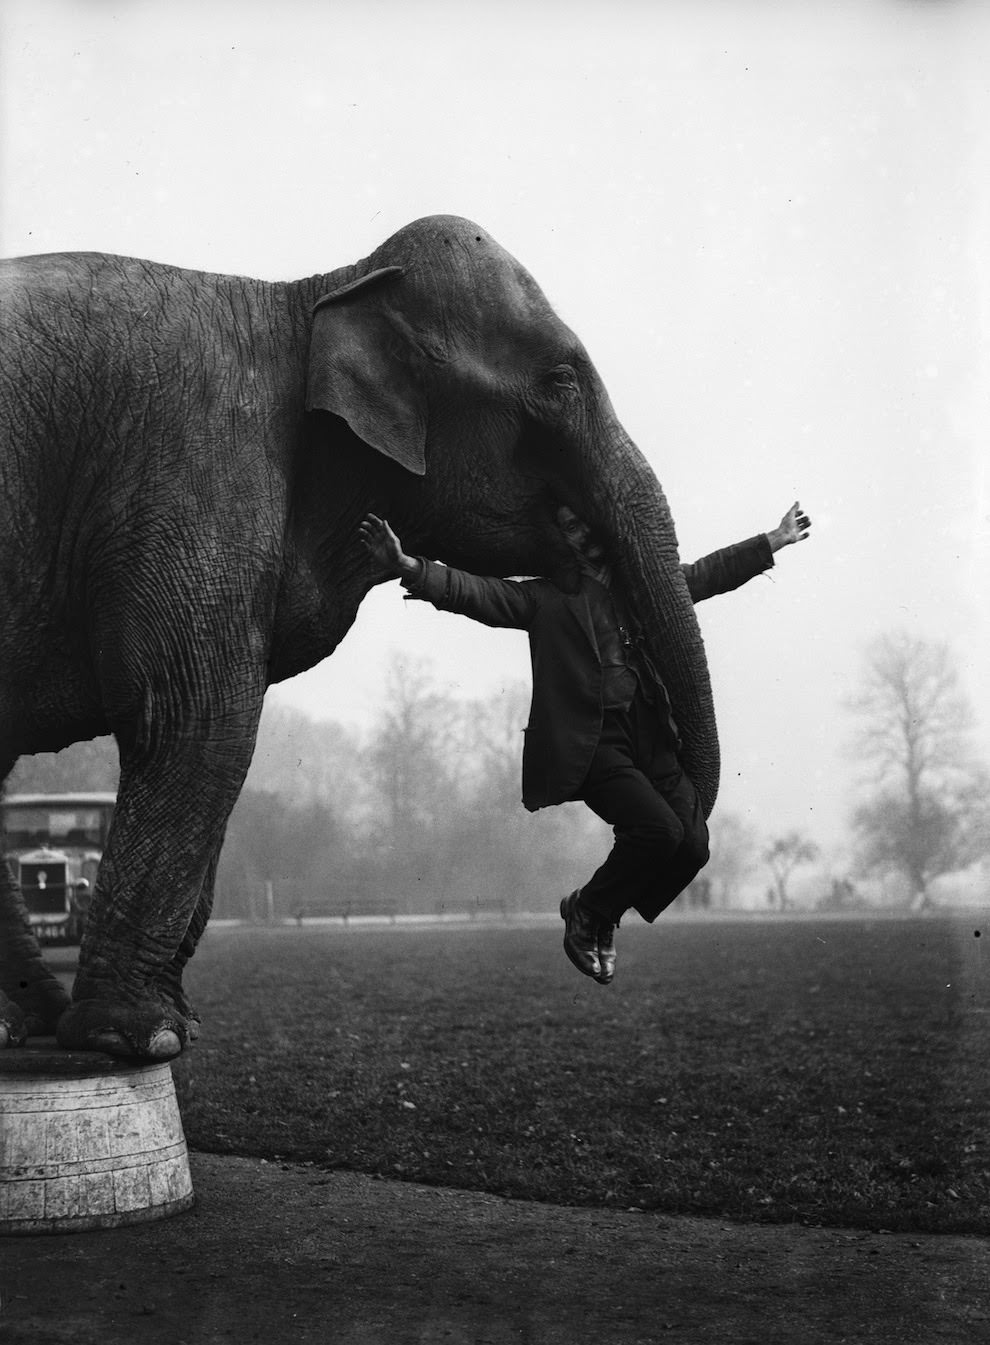 Dixie the elephant from Whipsnade Zoo performs part of her repertoire with her keeper George Braham, 1932